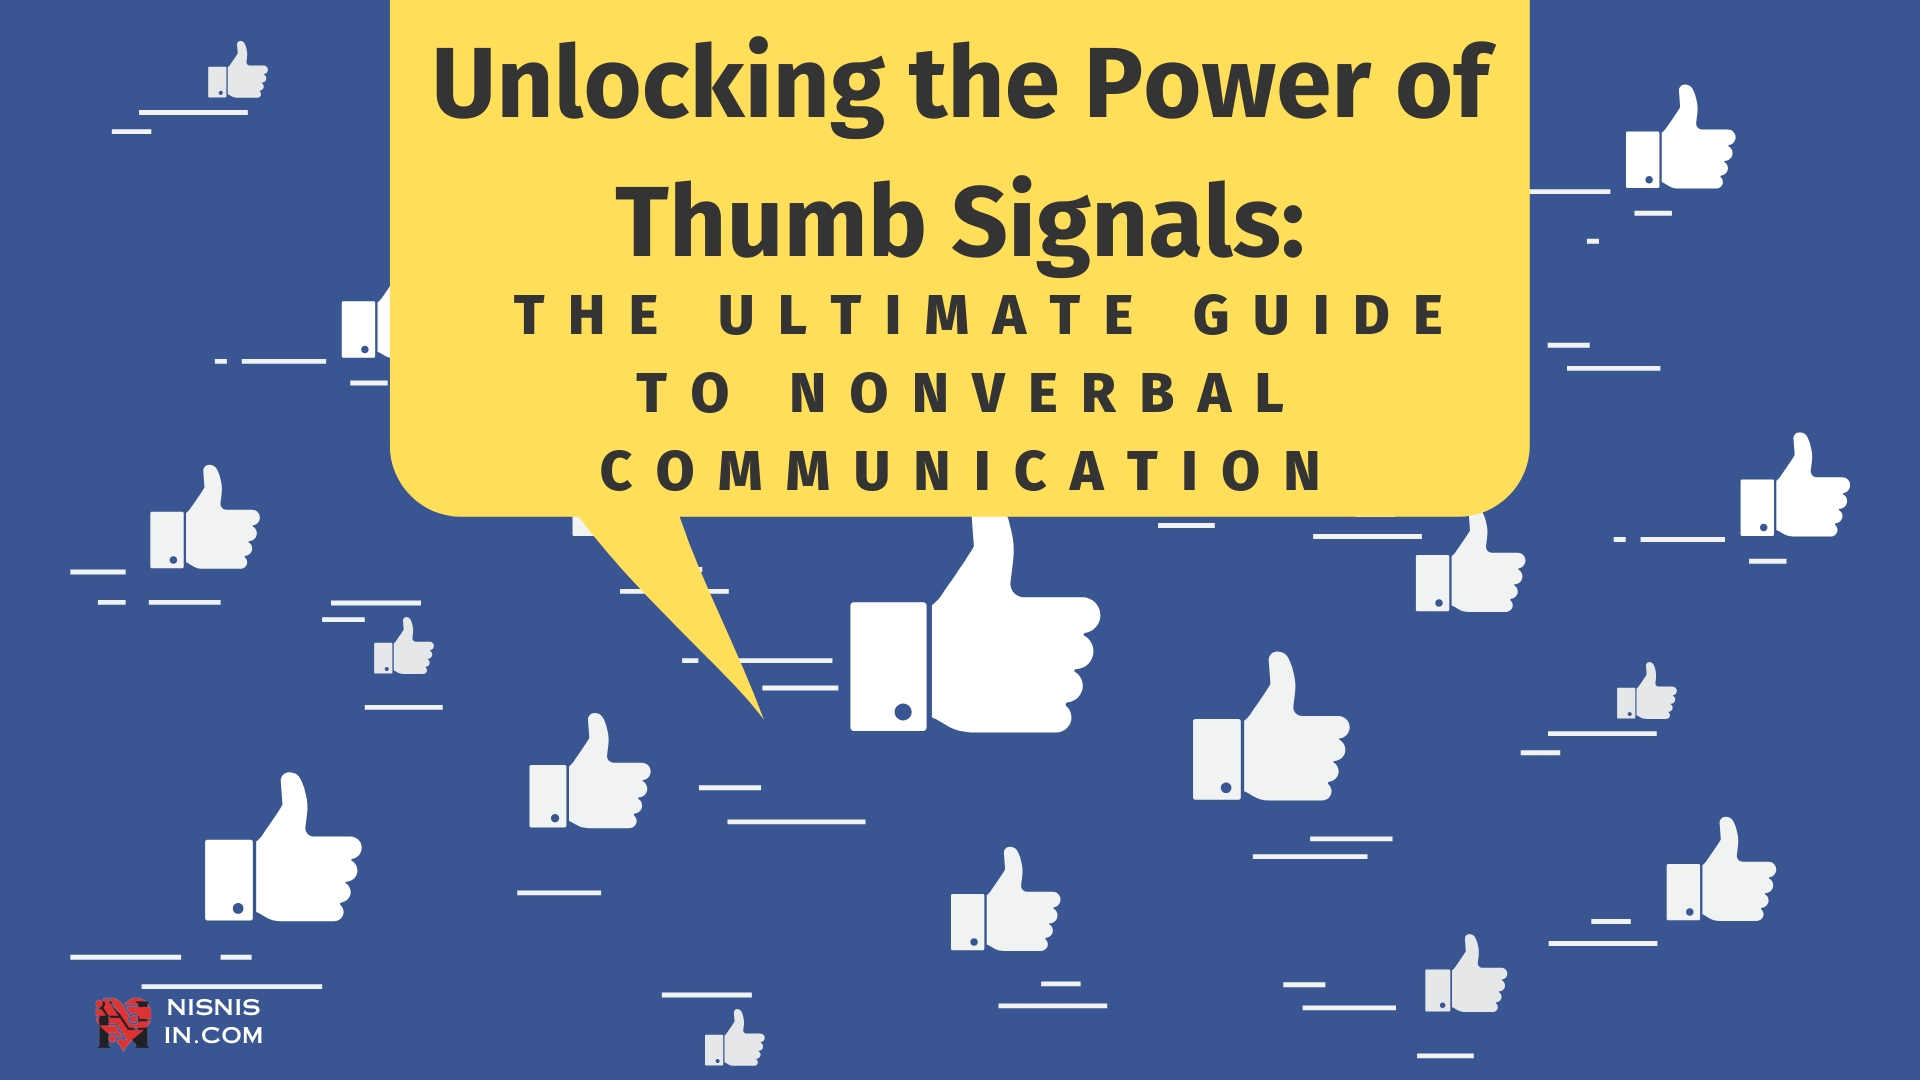 Unlocking the Power of Thumb Signals: The Ultimate Guide to Nonverbal Communication